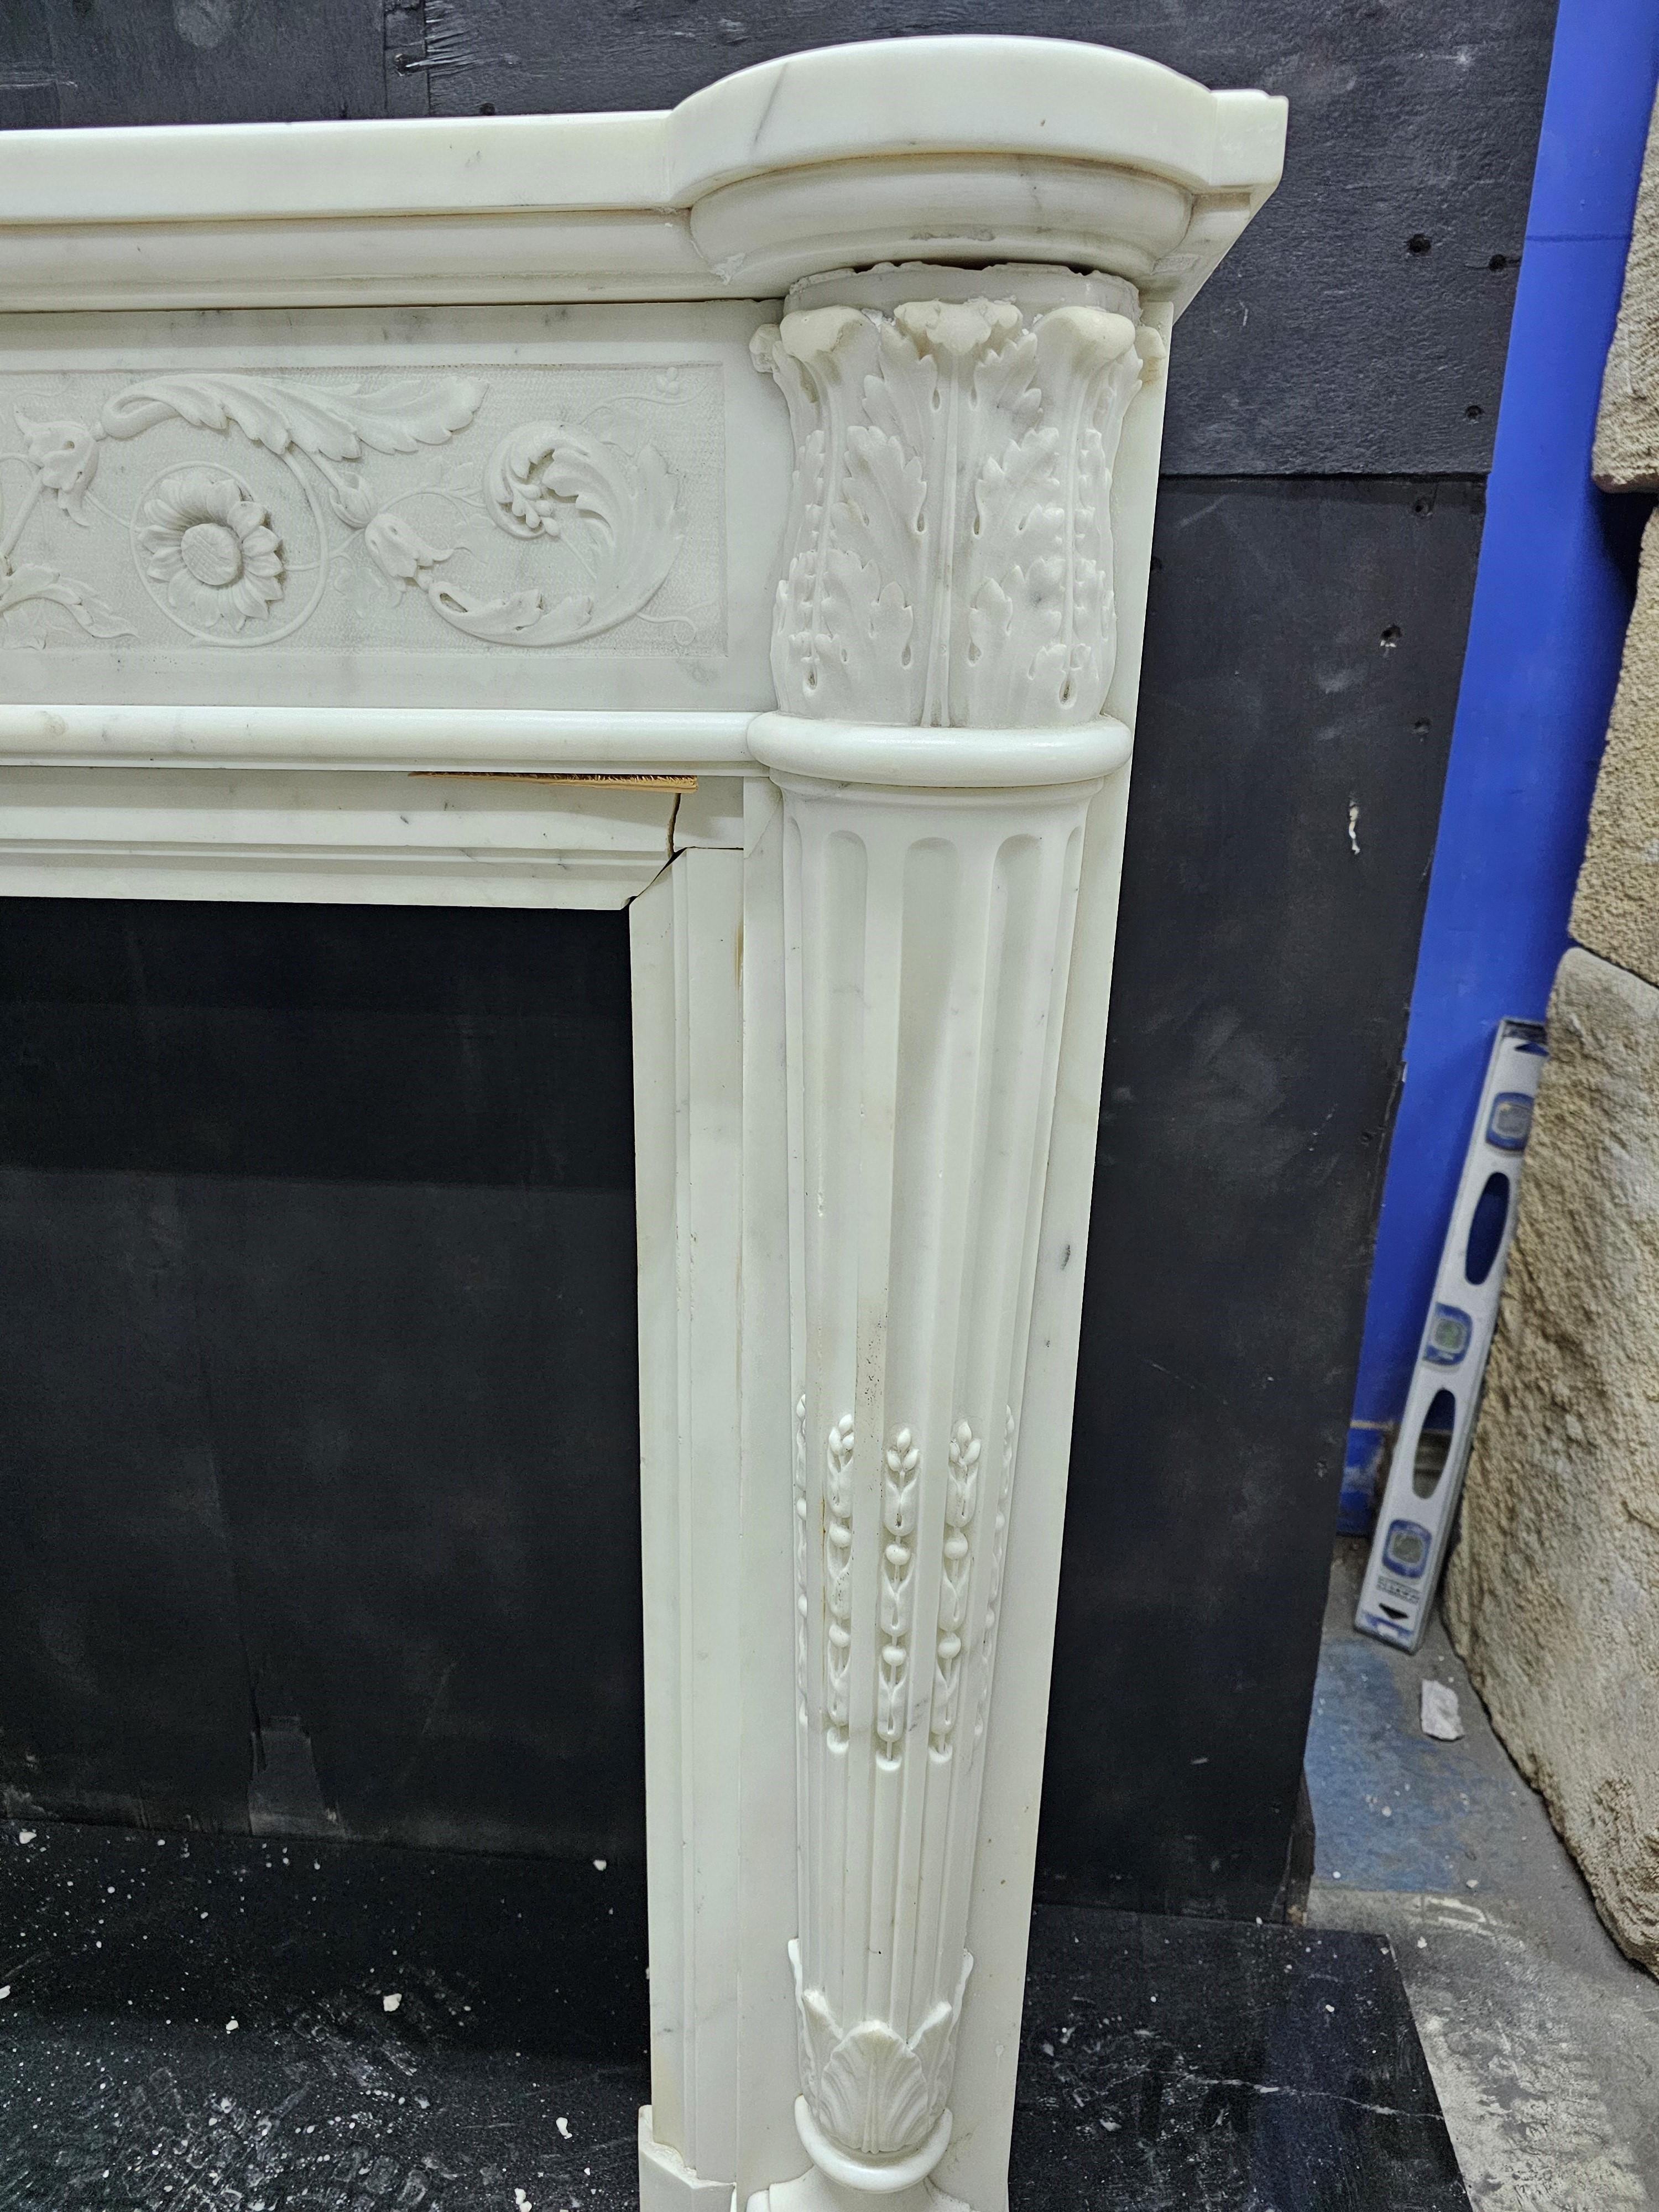 Finely carved early 19th c French chimneypiece in statuary marble with engaged stop fluted half round columns terminating beneath acanthus carved capitals, the frieze with delicately carved low relief foliate arabesques against a hammered